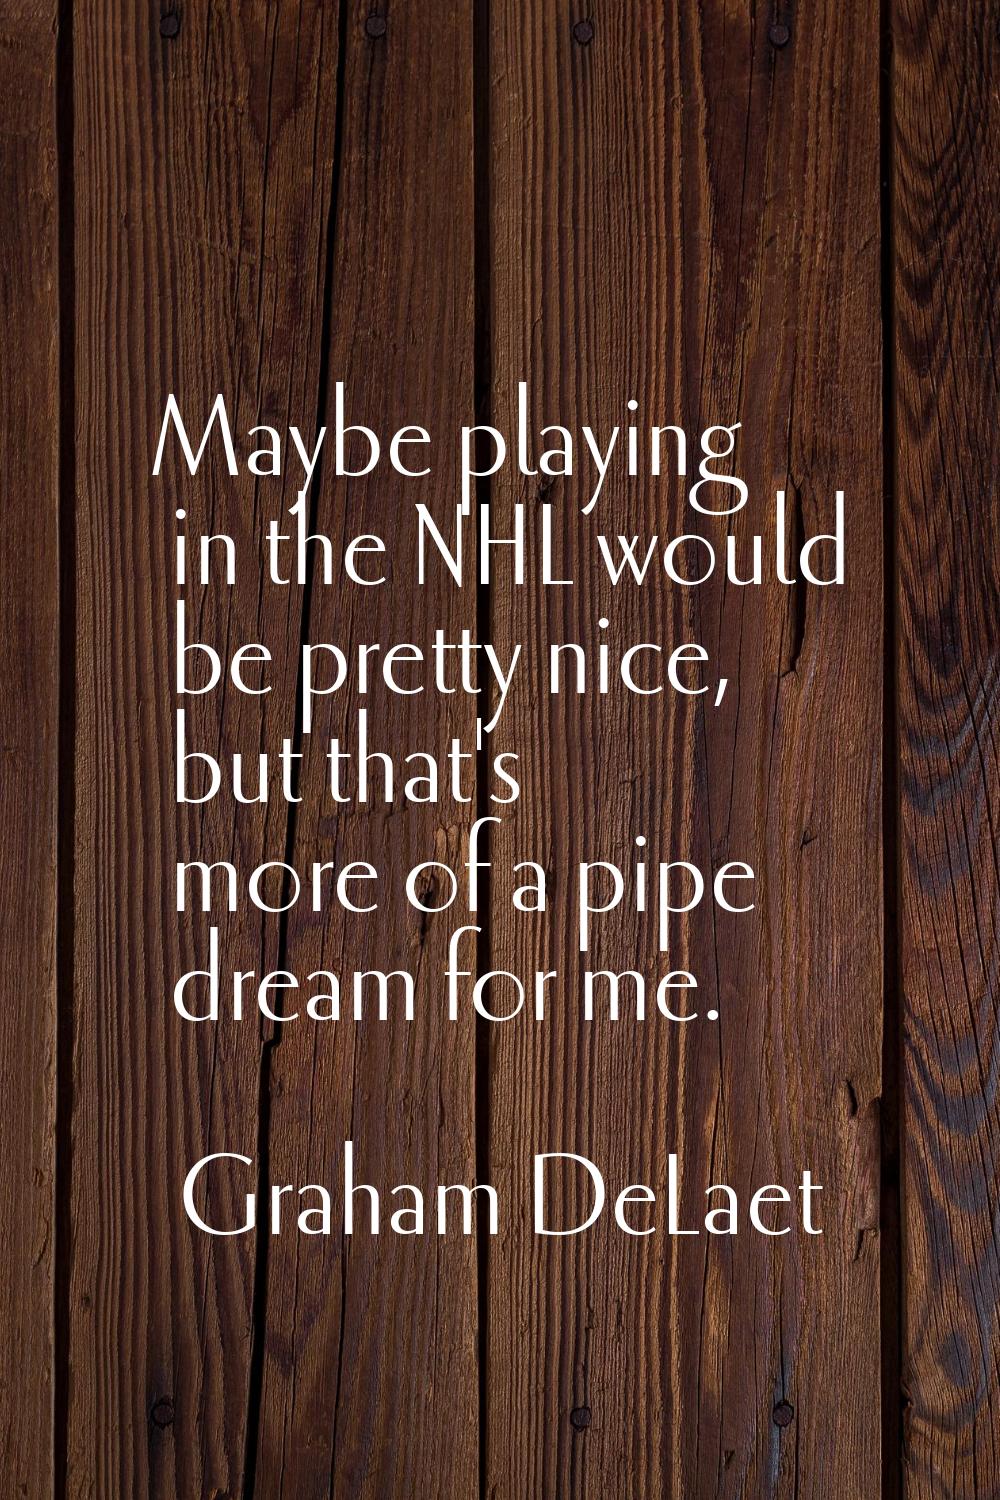 Maybe playing in the NHL would be pretty nice, but that's more of a pipe dream for me.